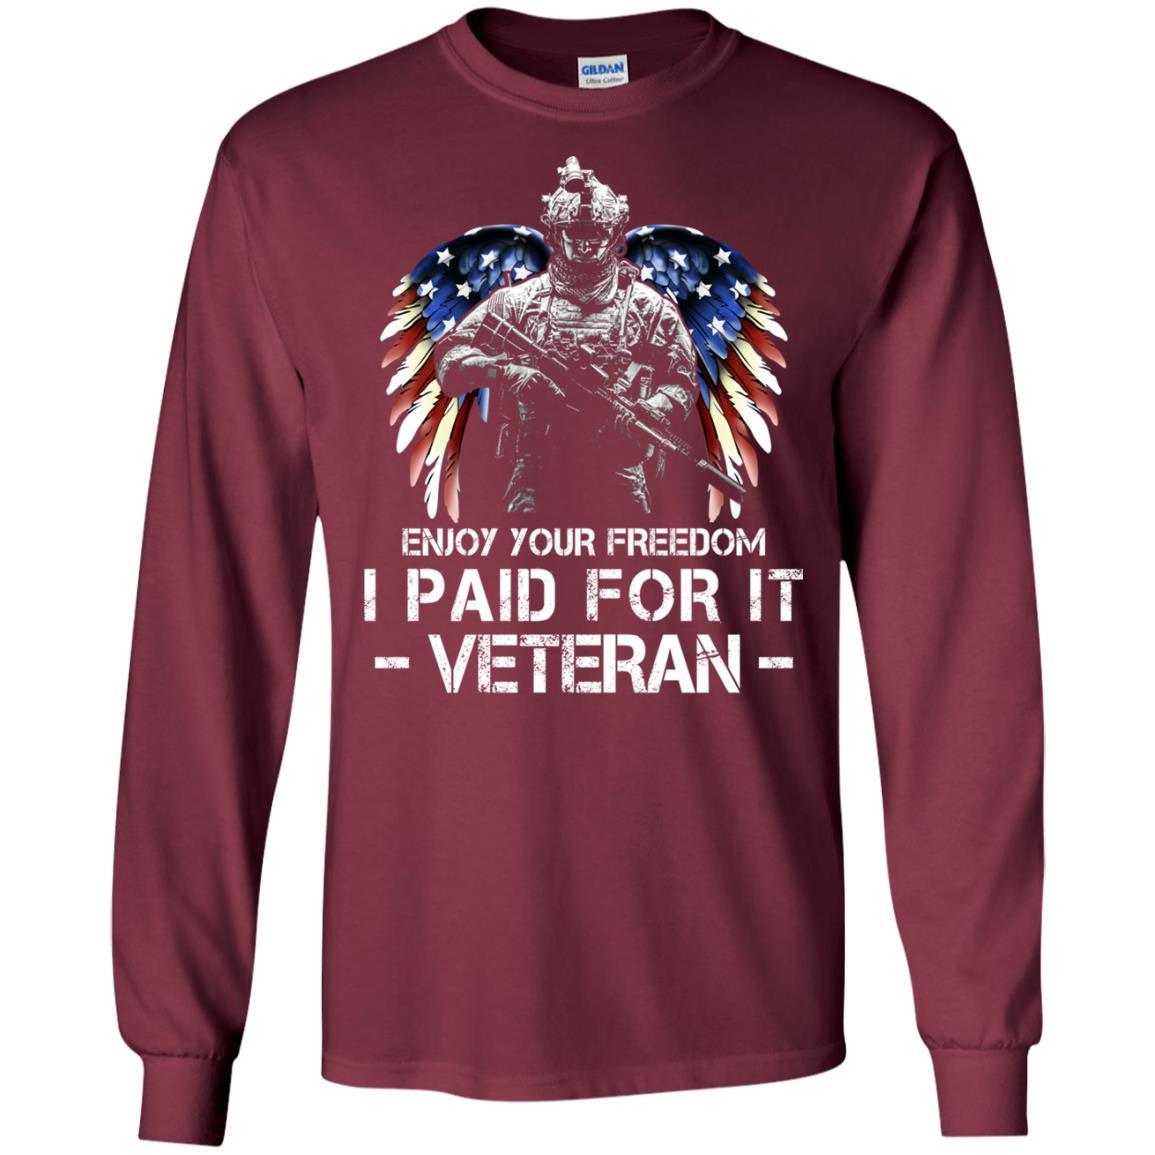 Military T-Shirt "Enjoy Your Freedom - I Paid For It Veteran Men On" Front-TShirt-General-Veterans Nation